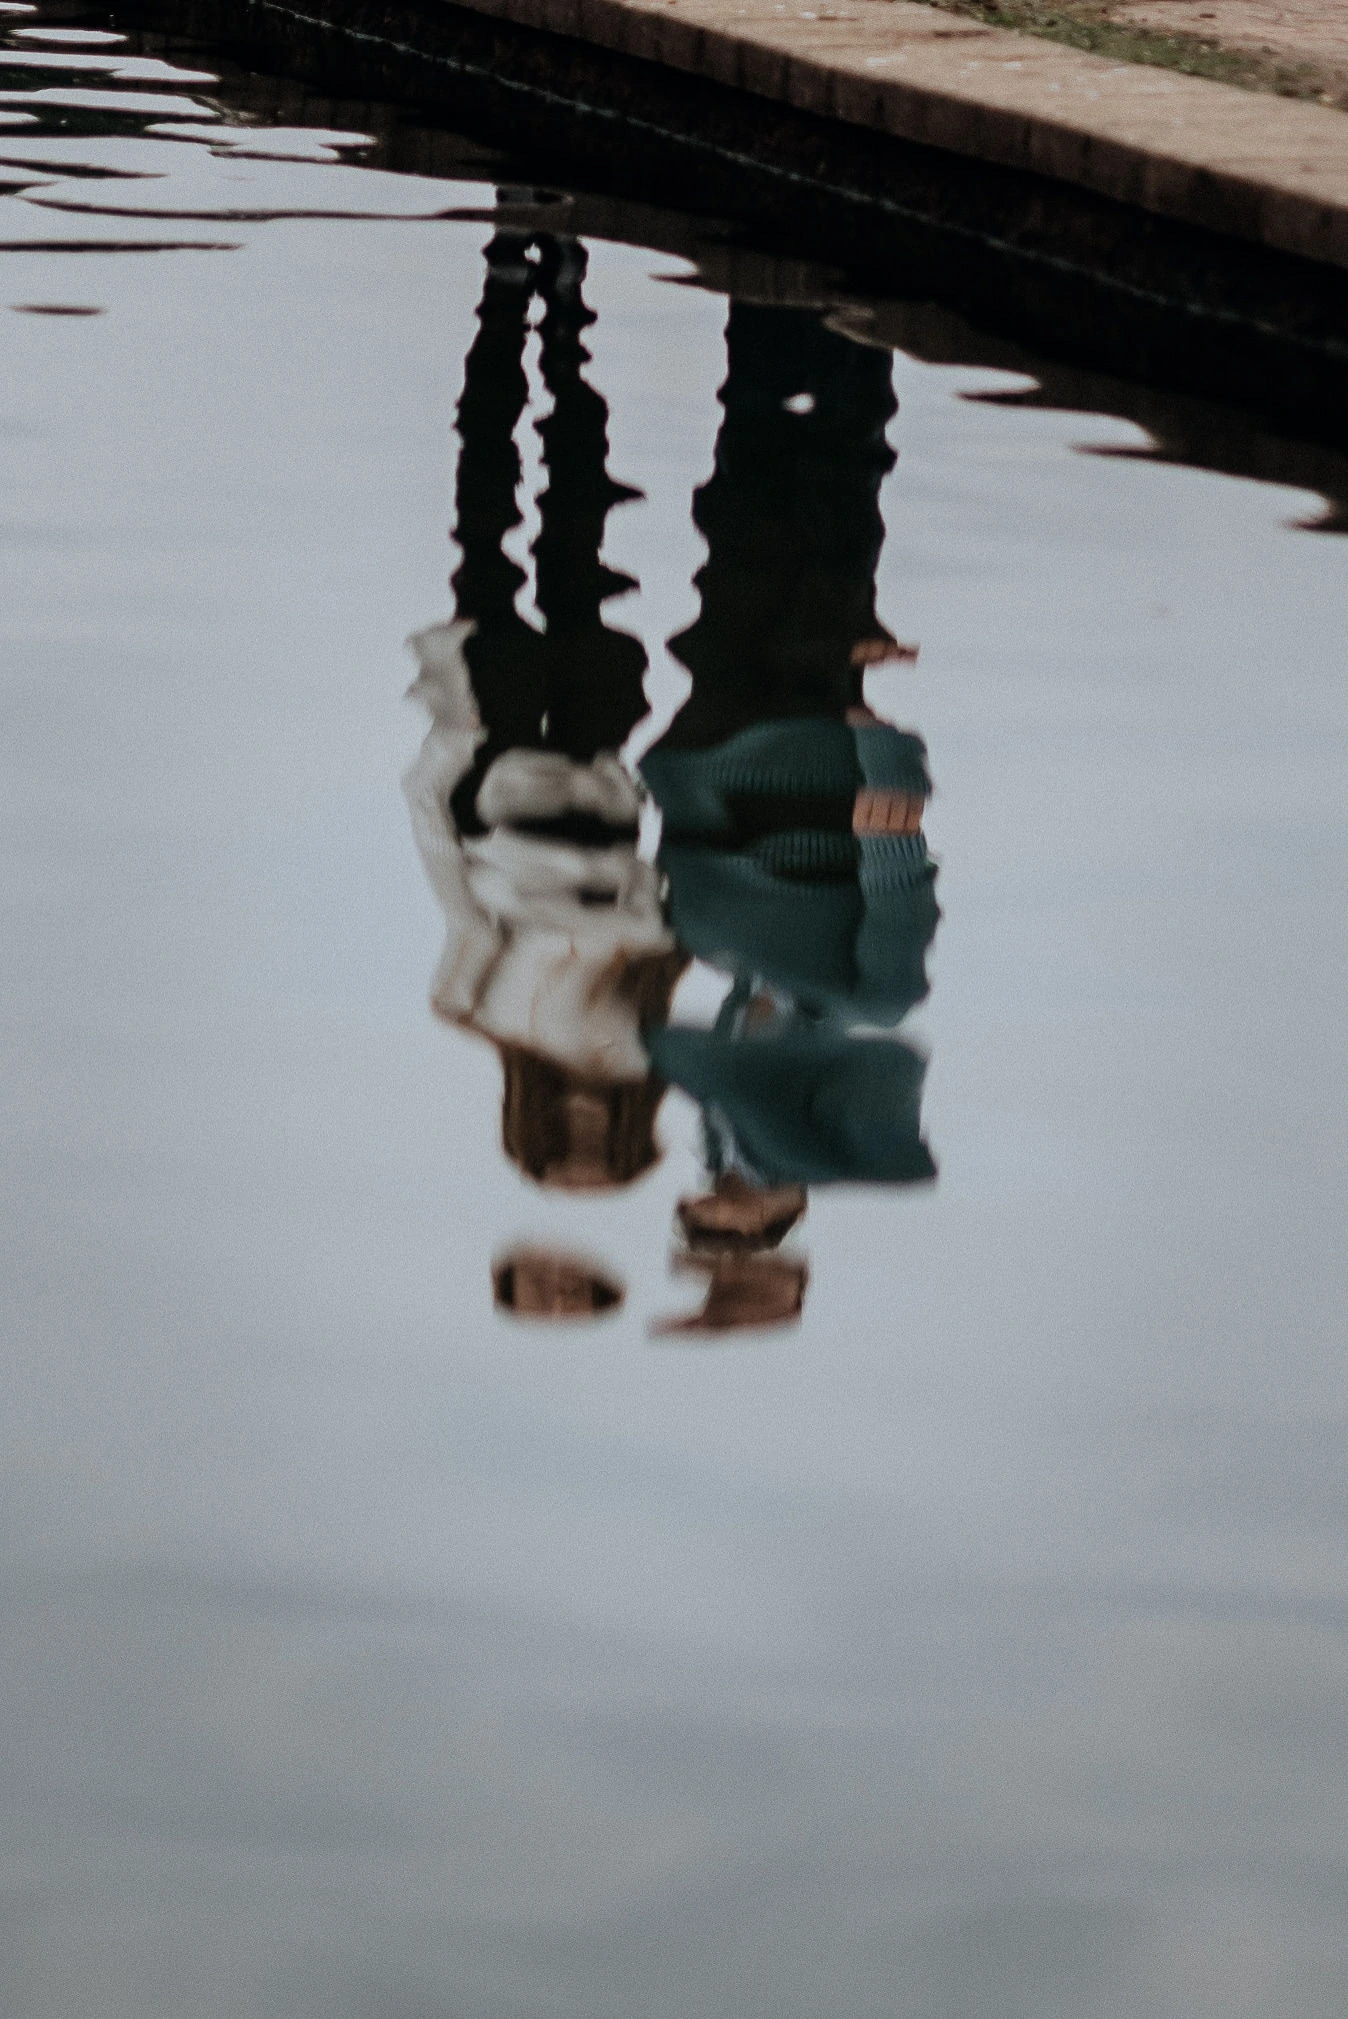 A wavy reflection in the water of a couple standing on the bank